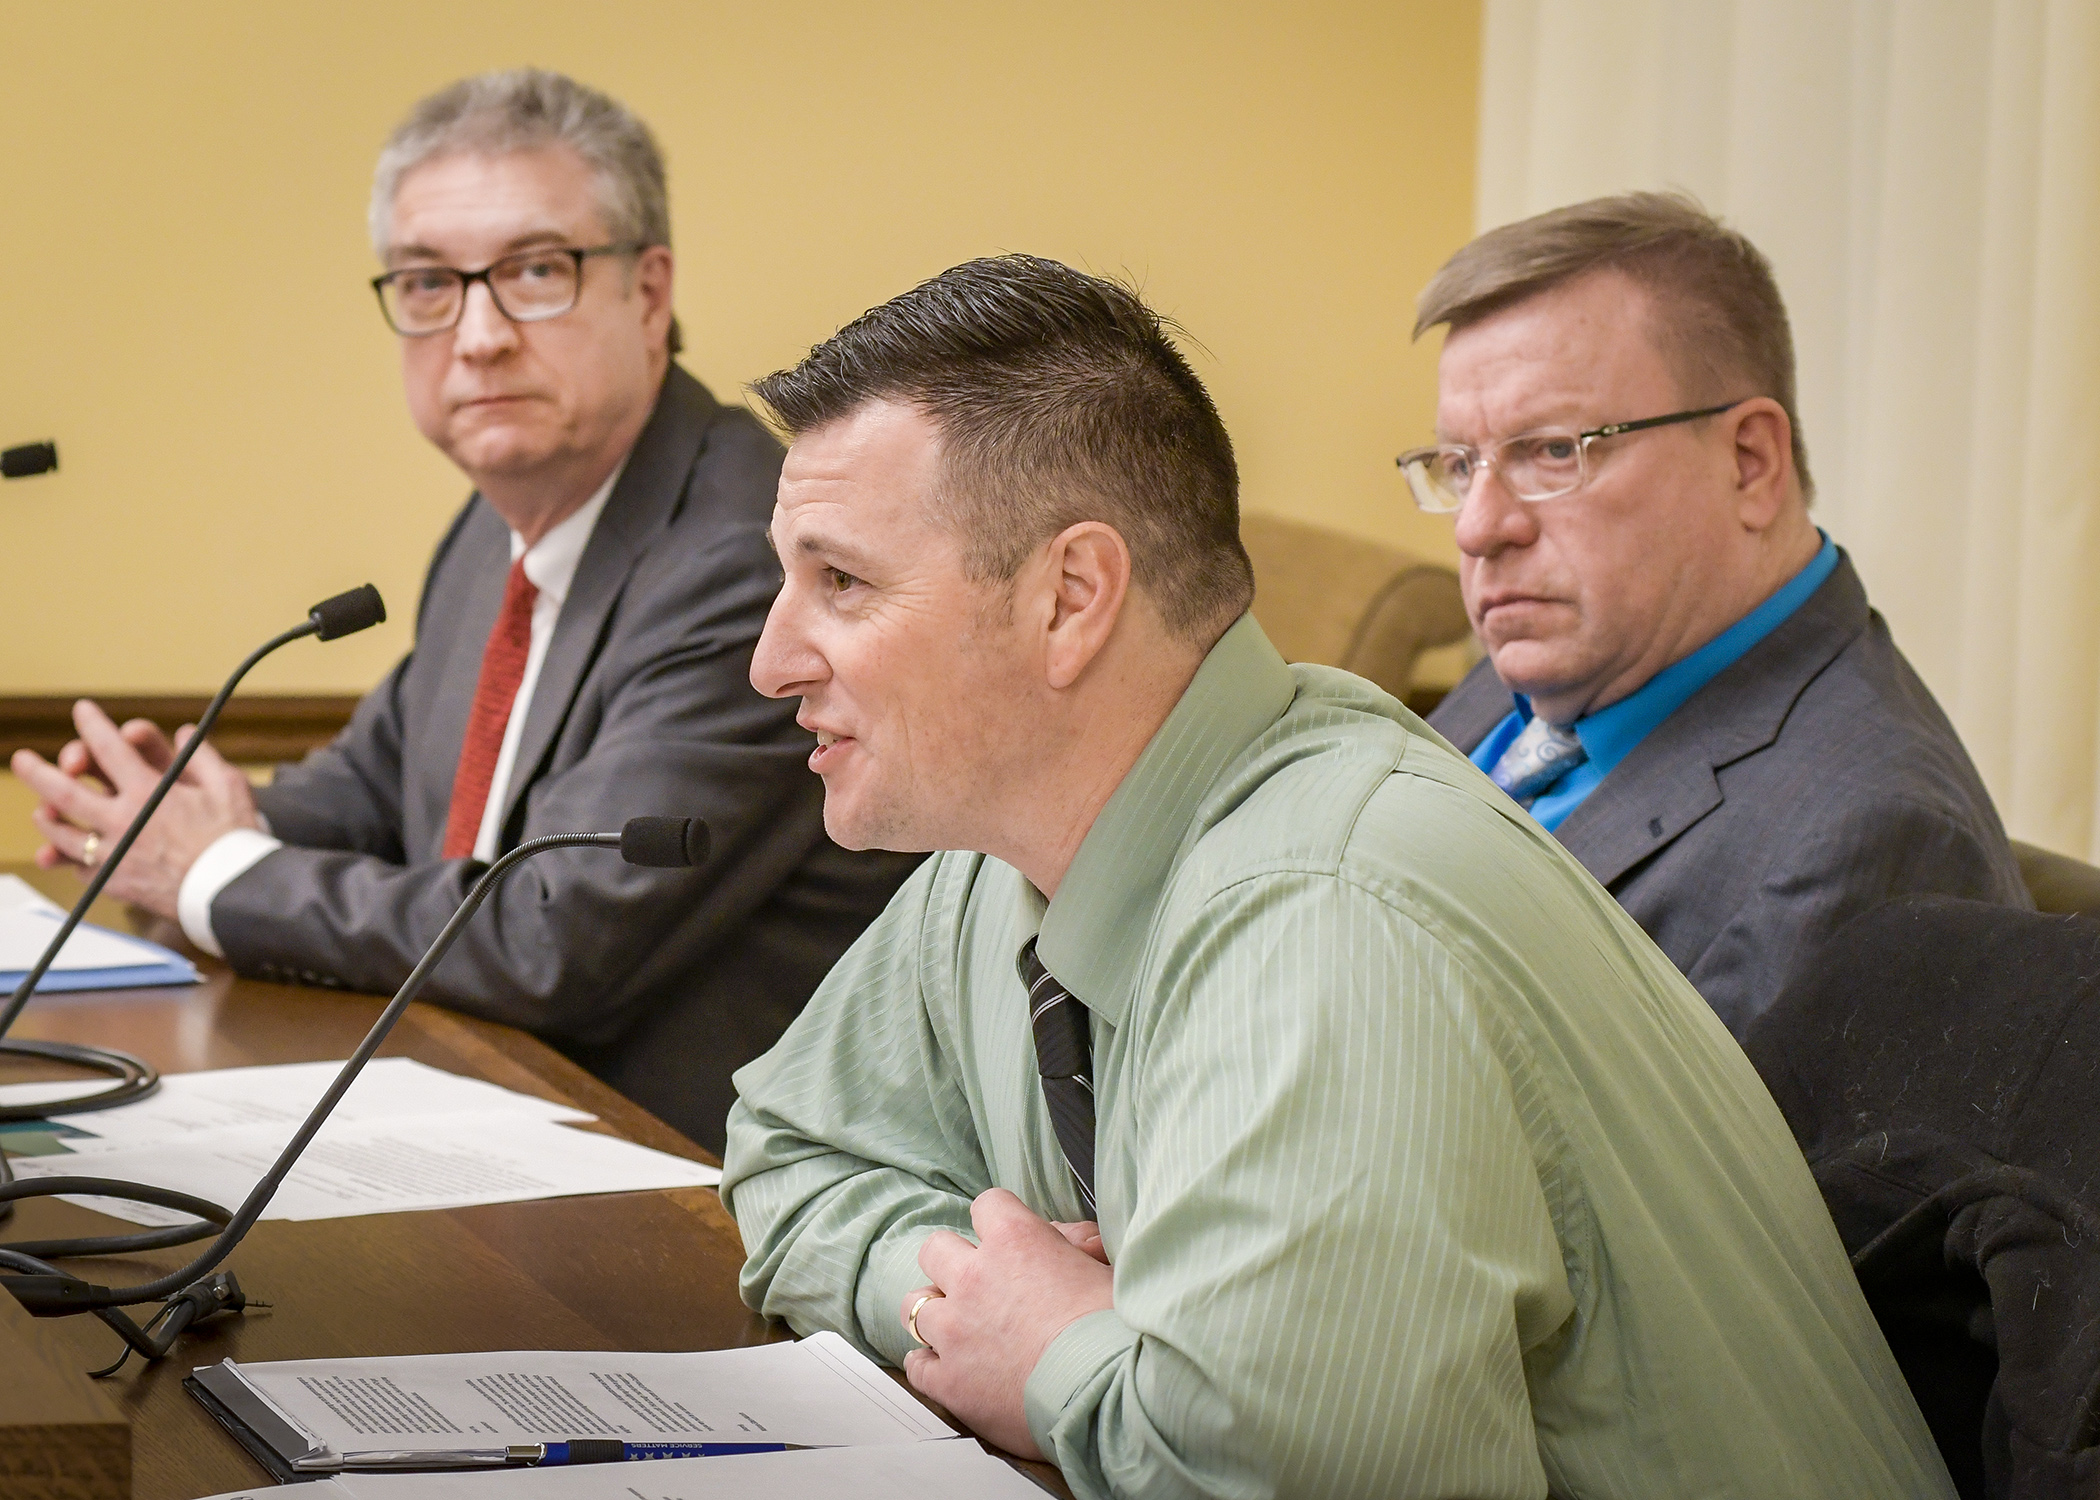 Justin Rost, center, interim director of Helmets to Hardhats Minnesota, and Gary Thaden, left, chair of the Construction Careers Foundation, testify before the House Labor Committee Jan. 23 in support of HF119. Photo by Andrew VonBank